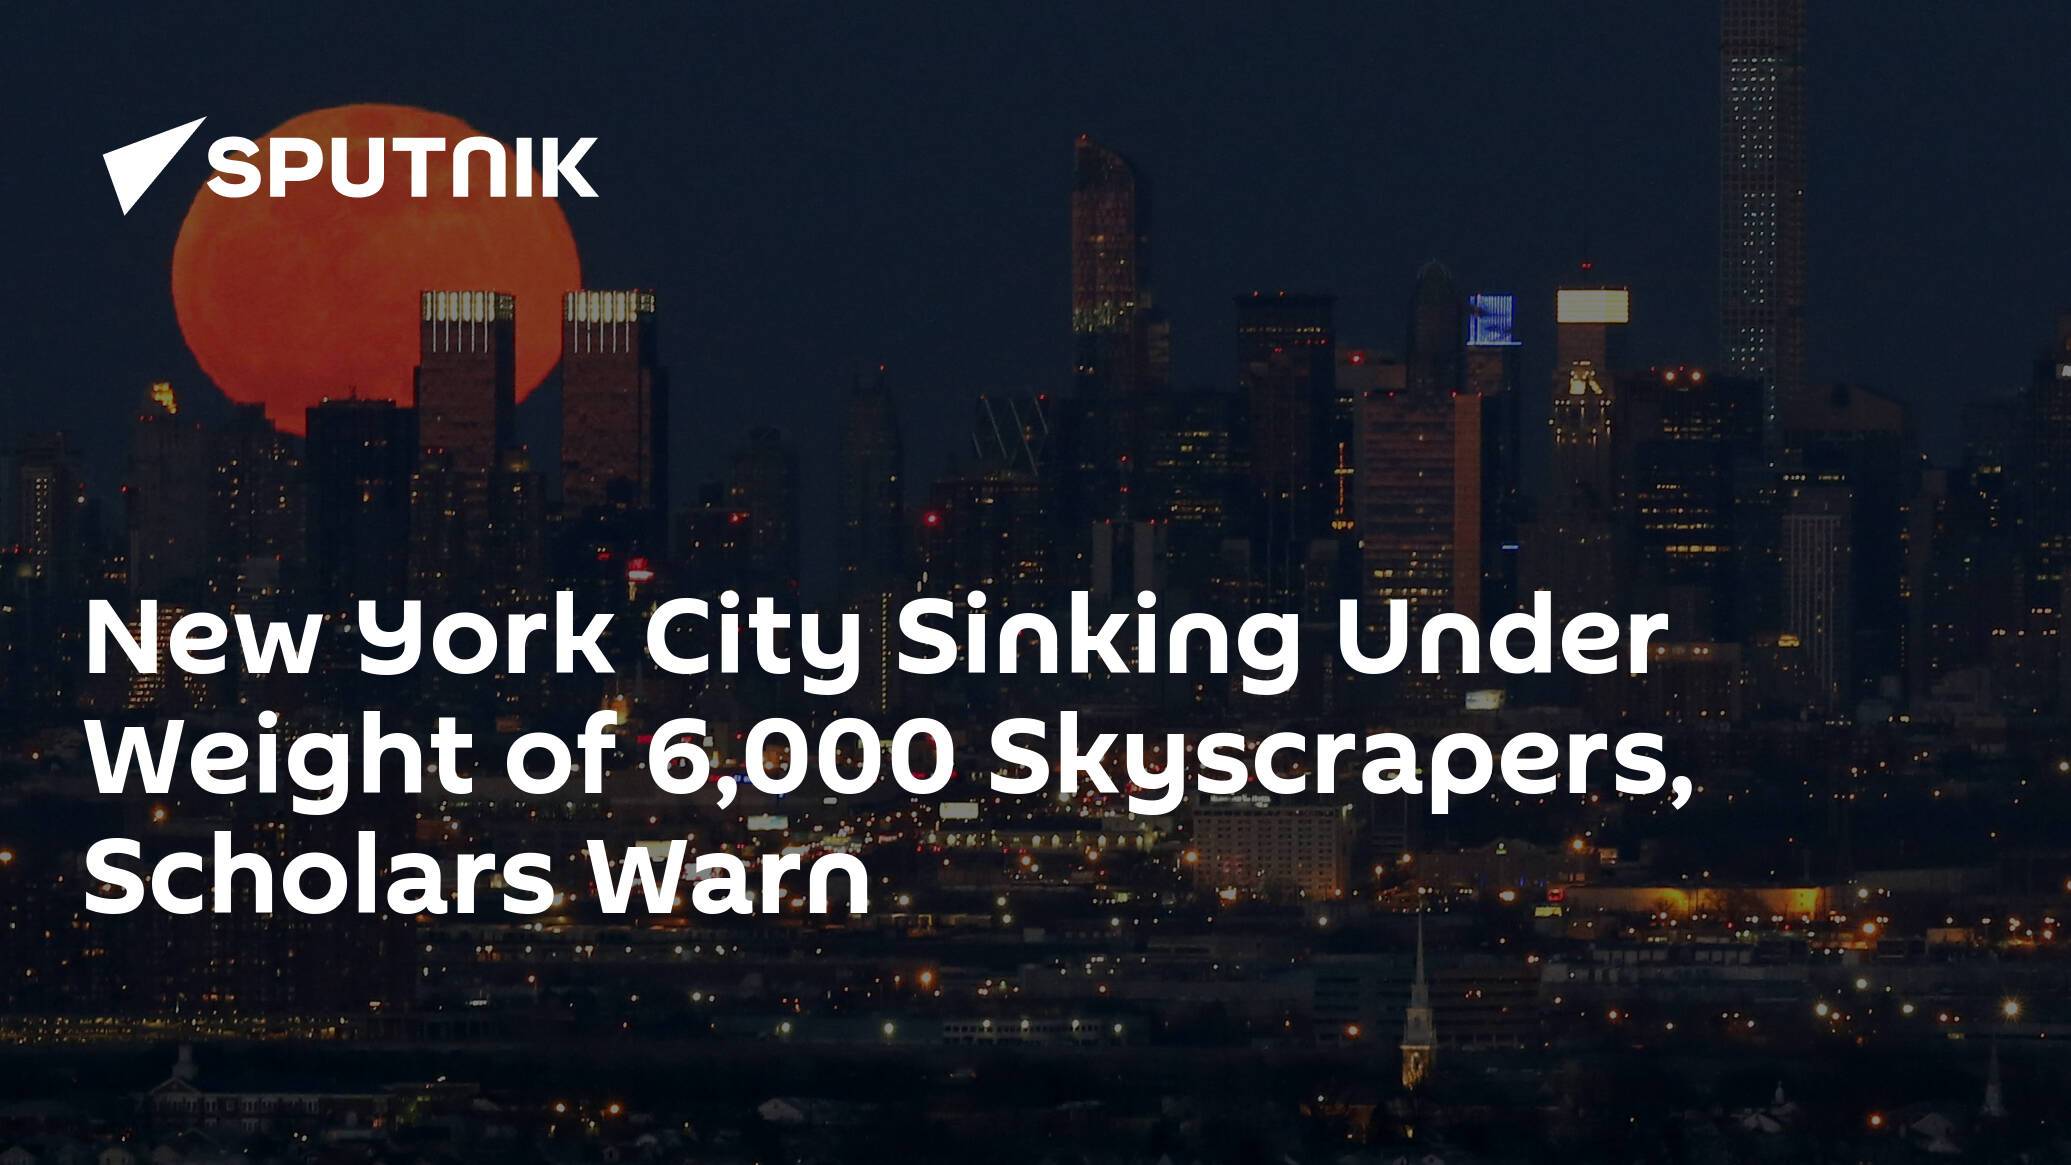 NYC Sinking: Findings of a new geological study suggests